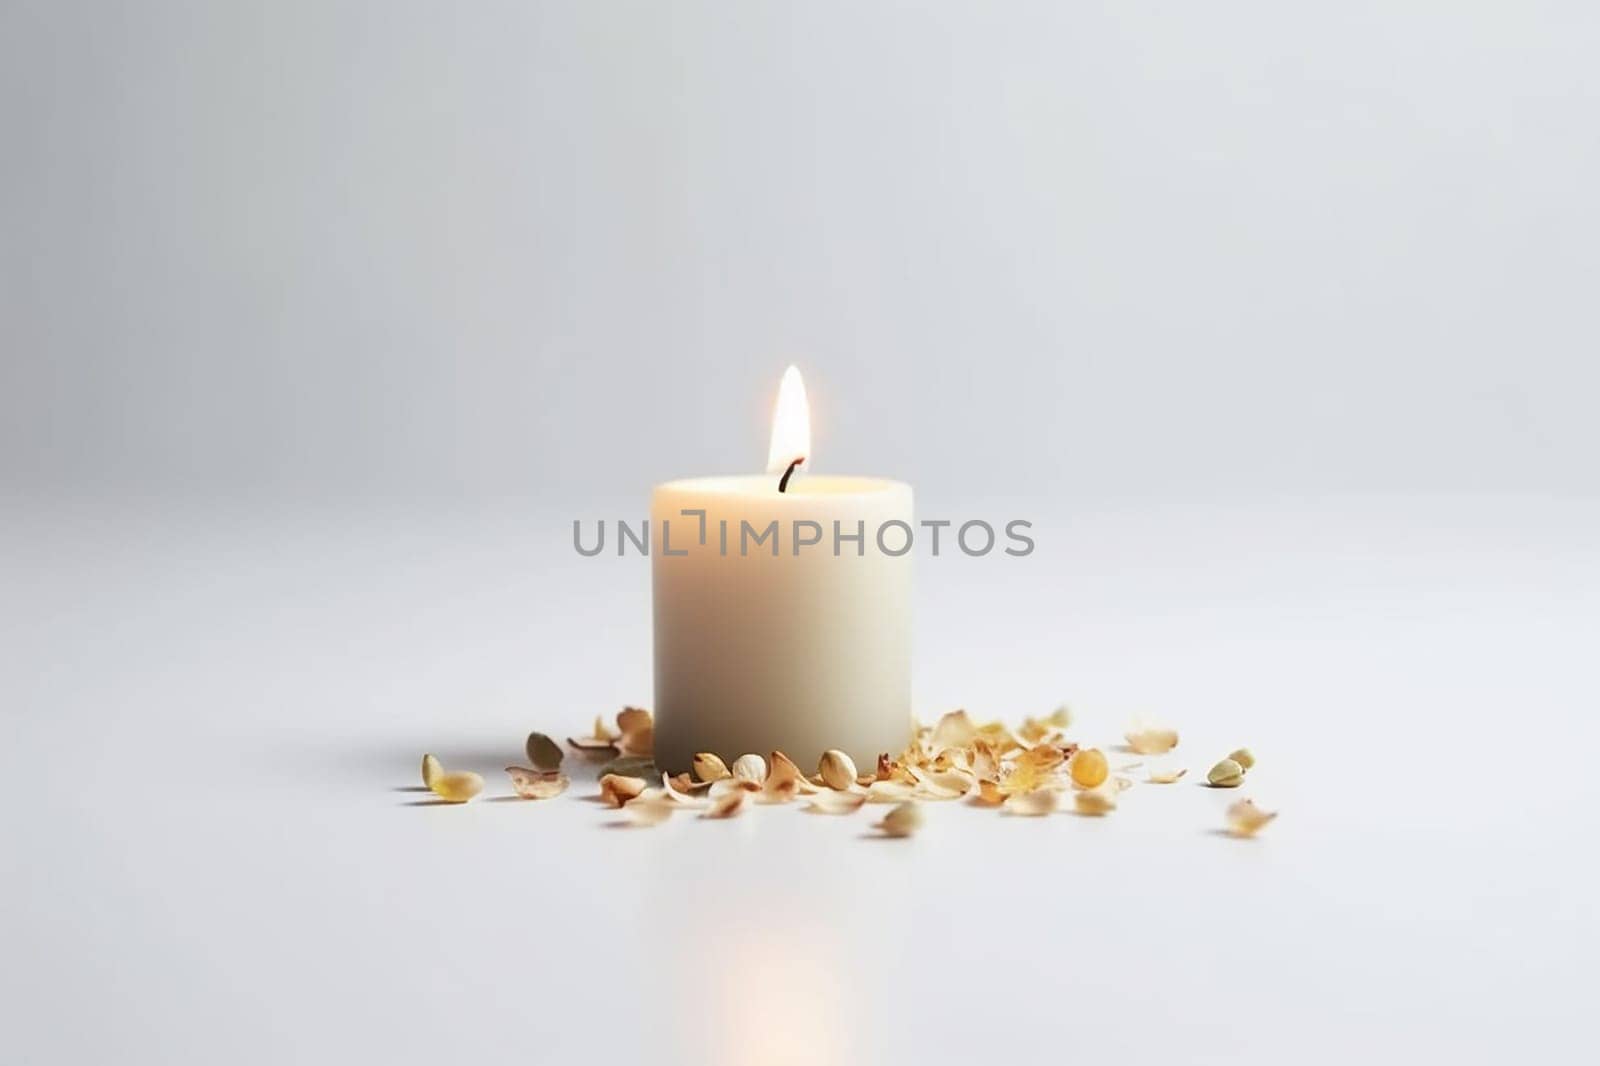 A lit candle surrounded by dried petals on a white background.